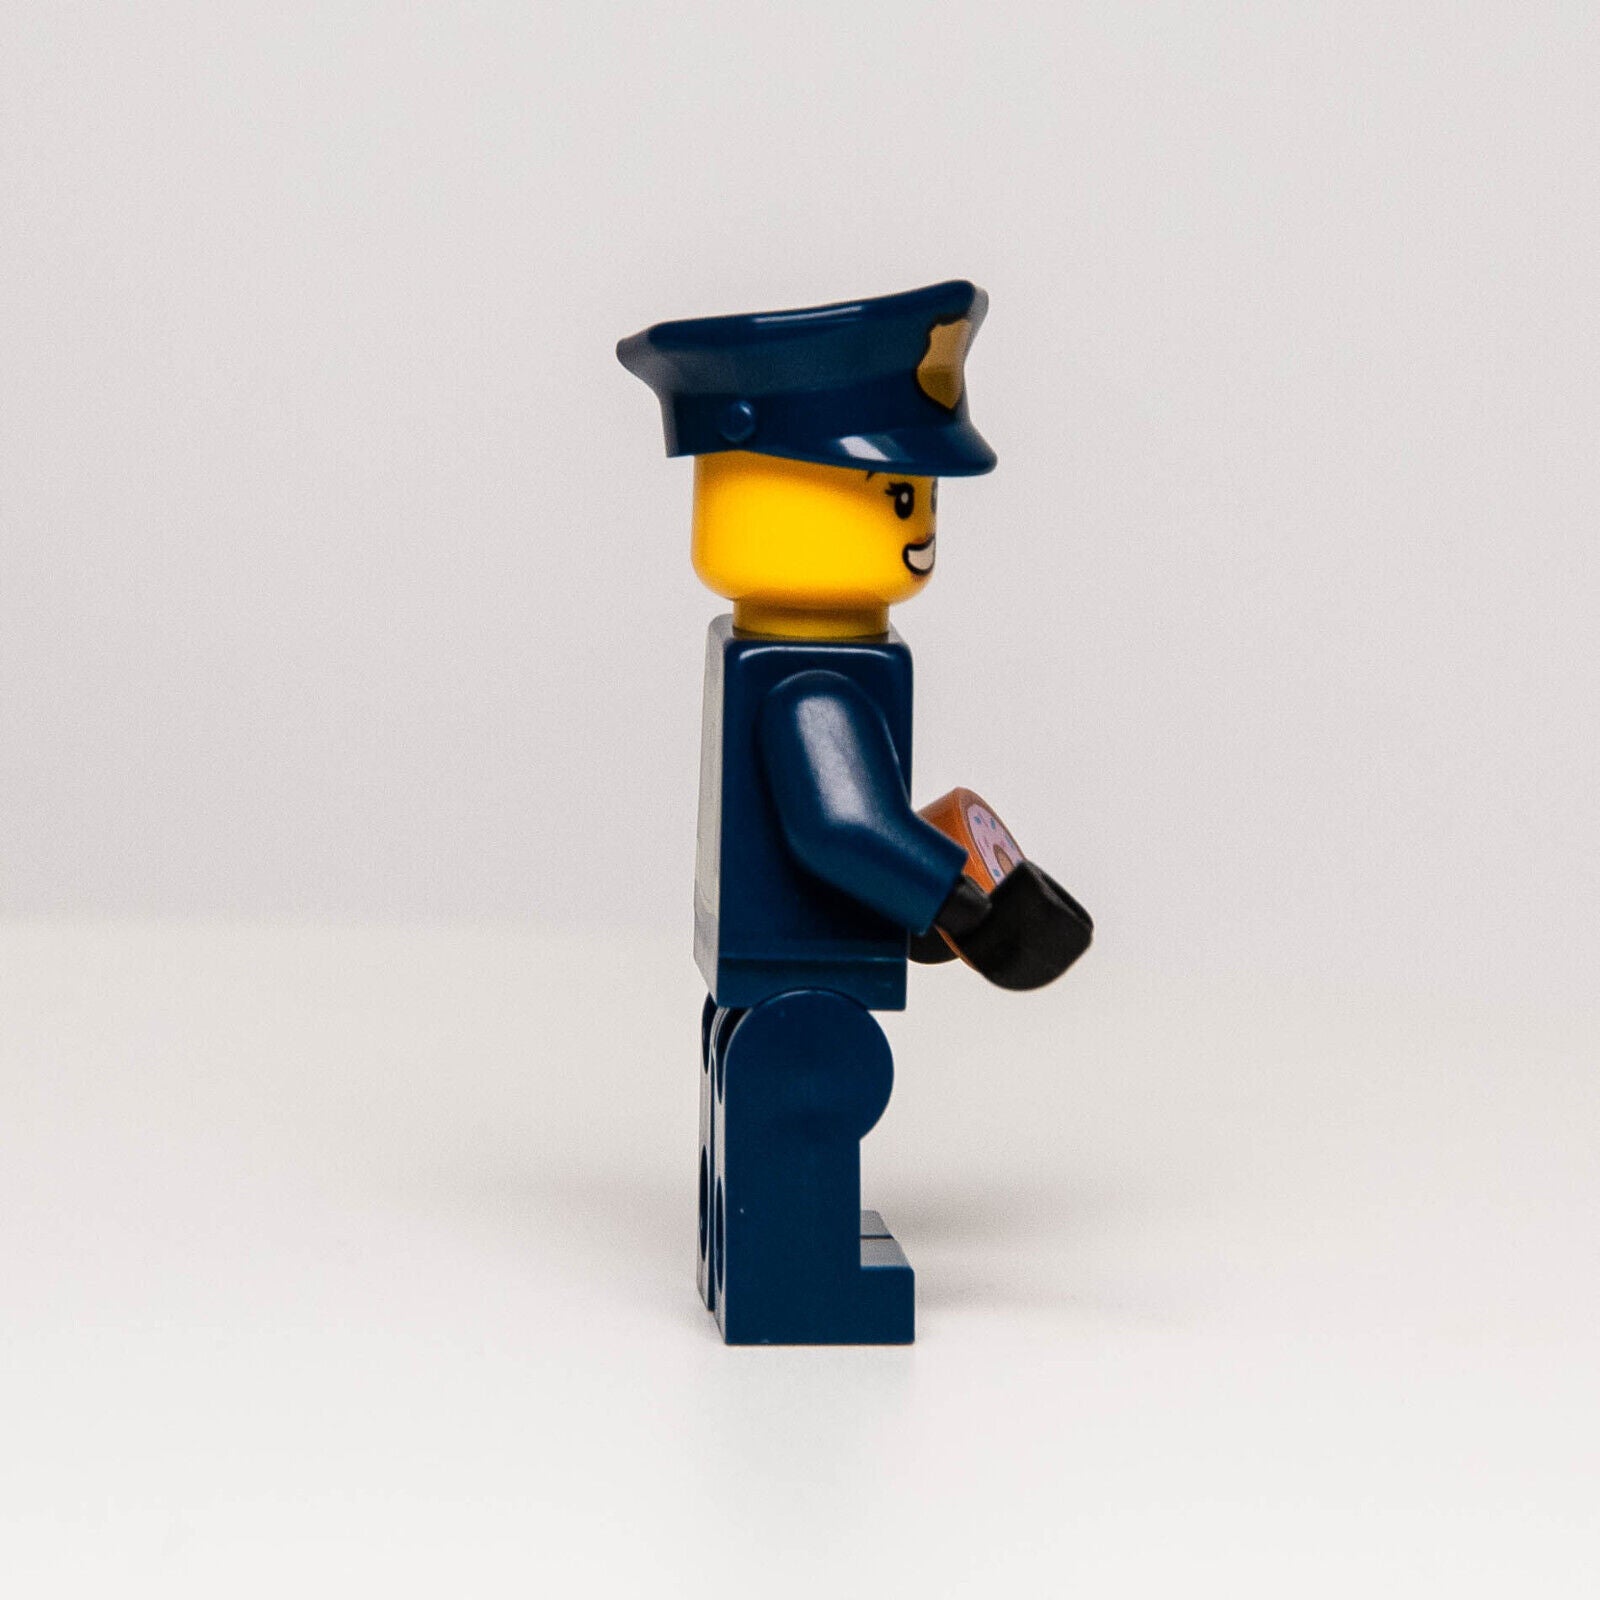 New Lego BAM 2023 Q2 Minifigure - Female Police Officer Cop w/ Donut